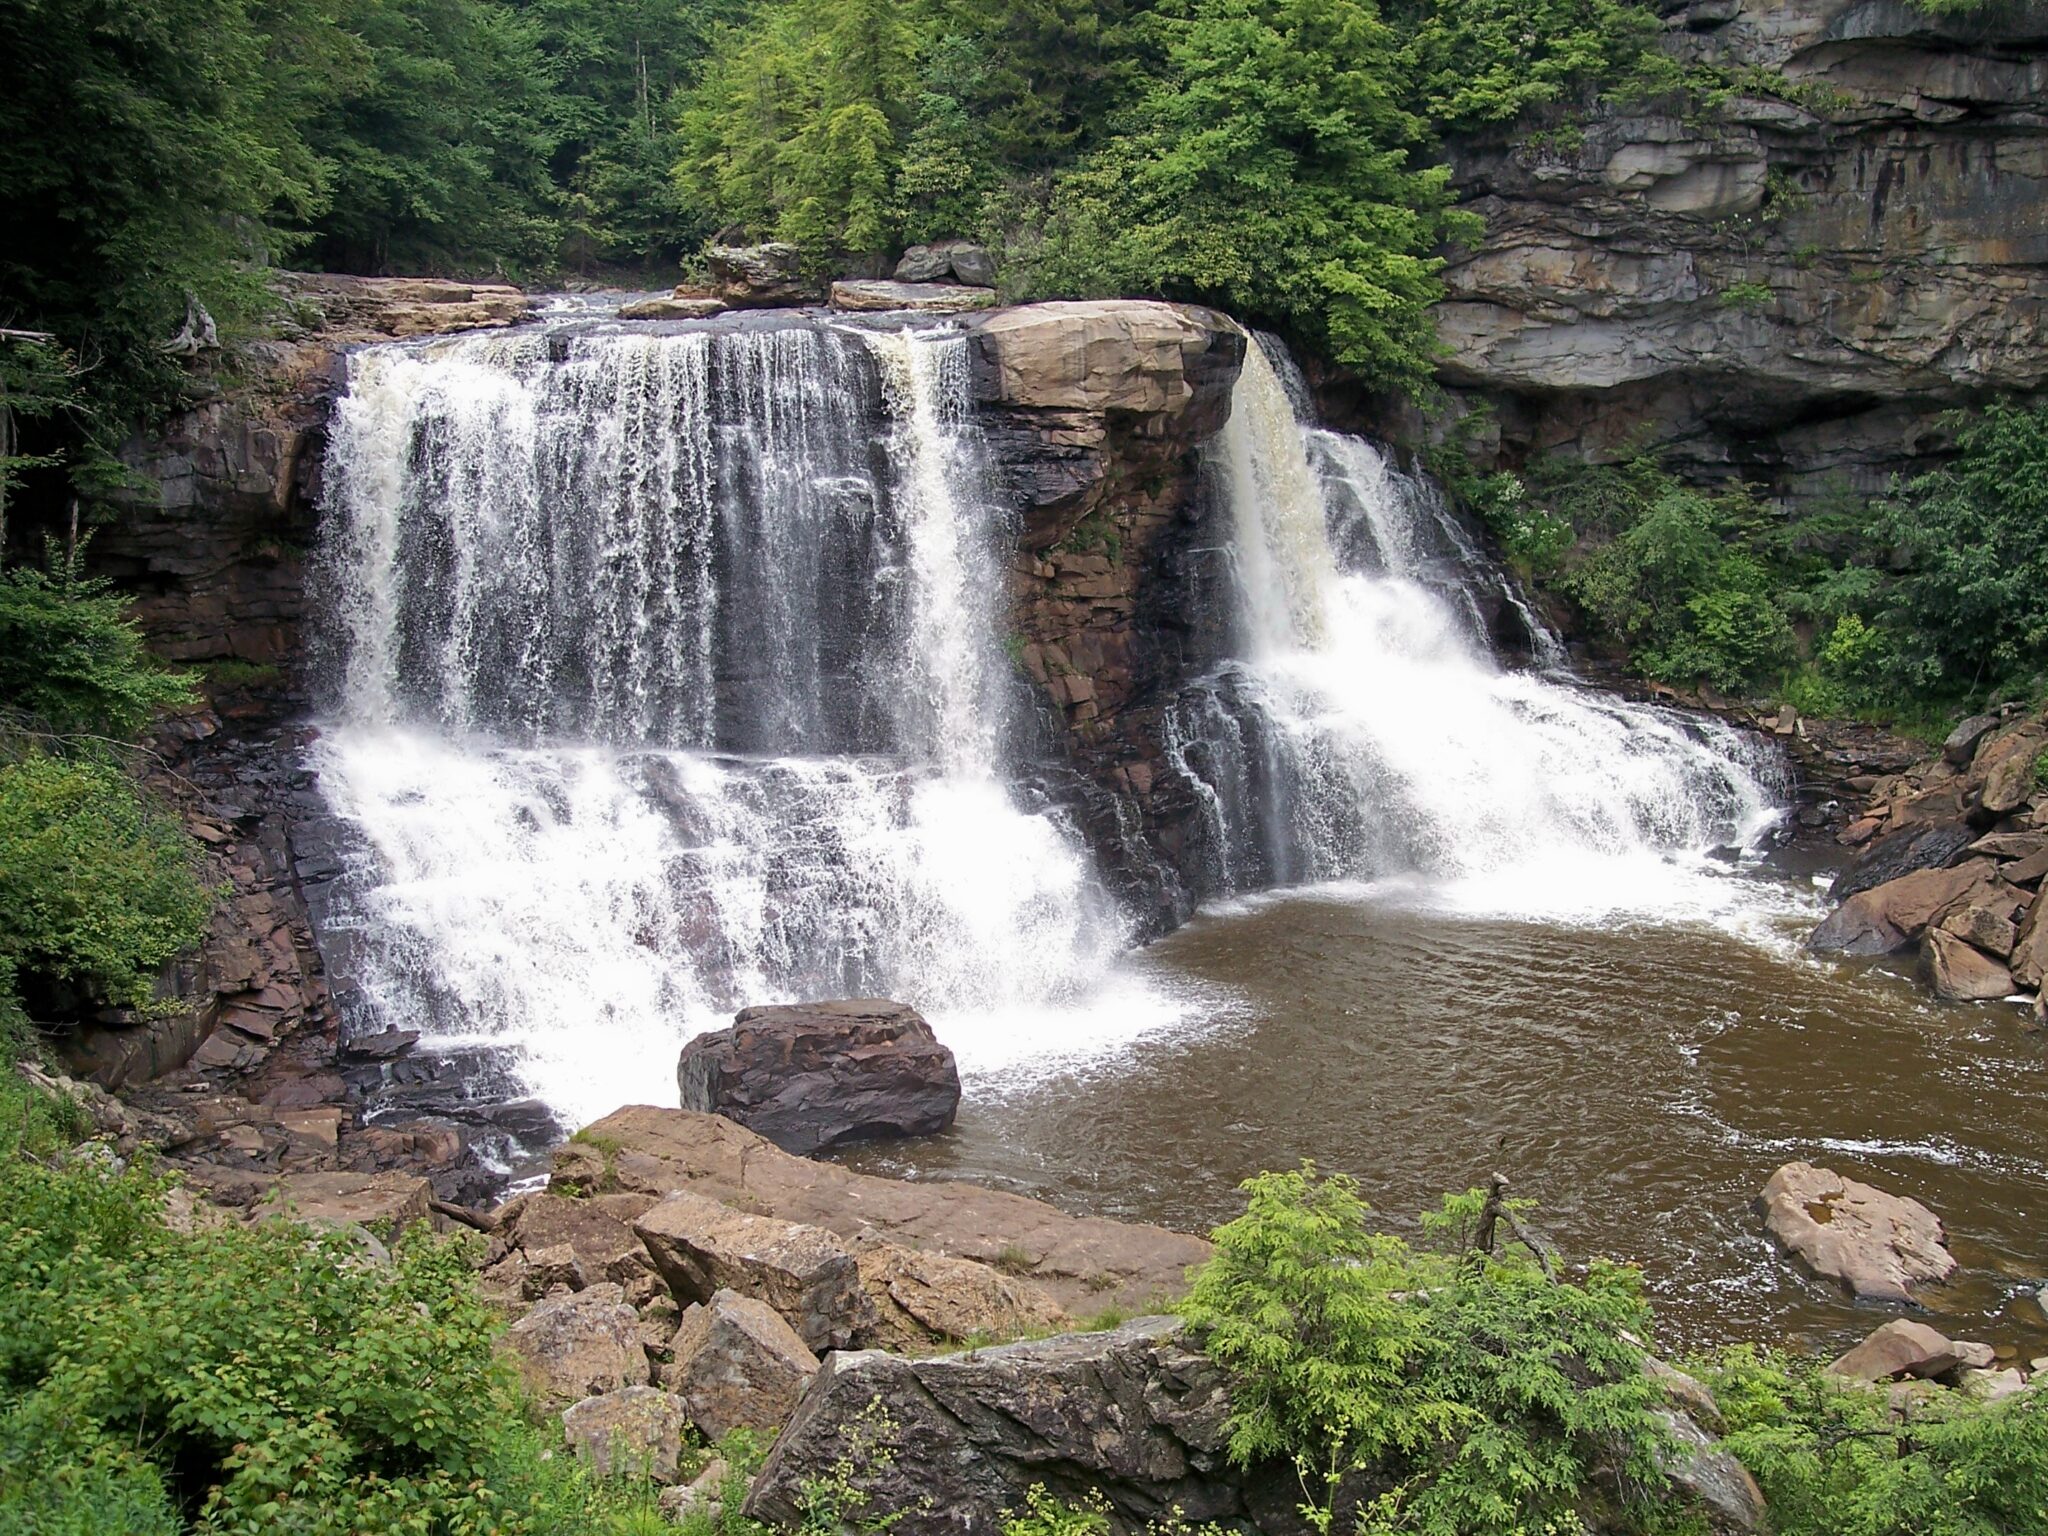 10 things to do in West Virginia